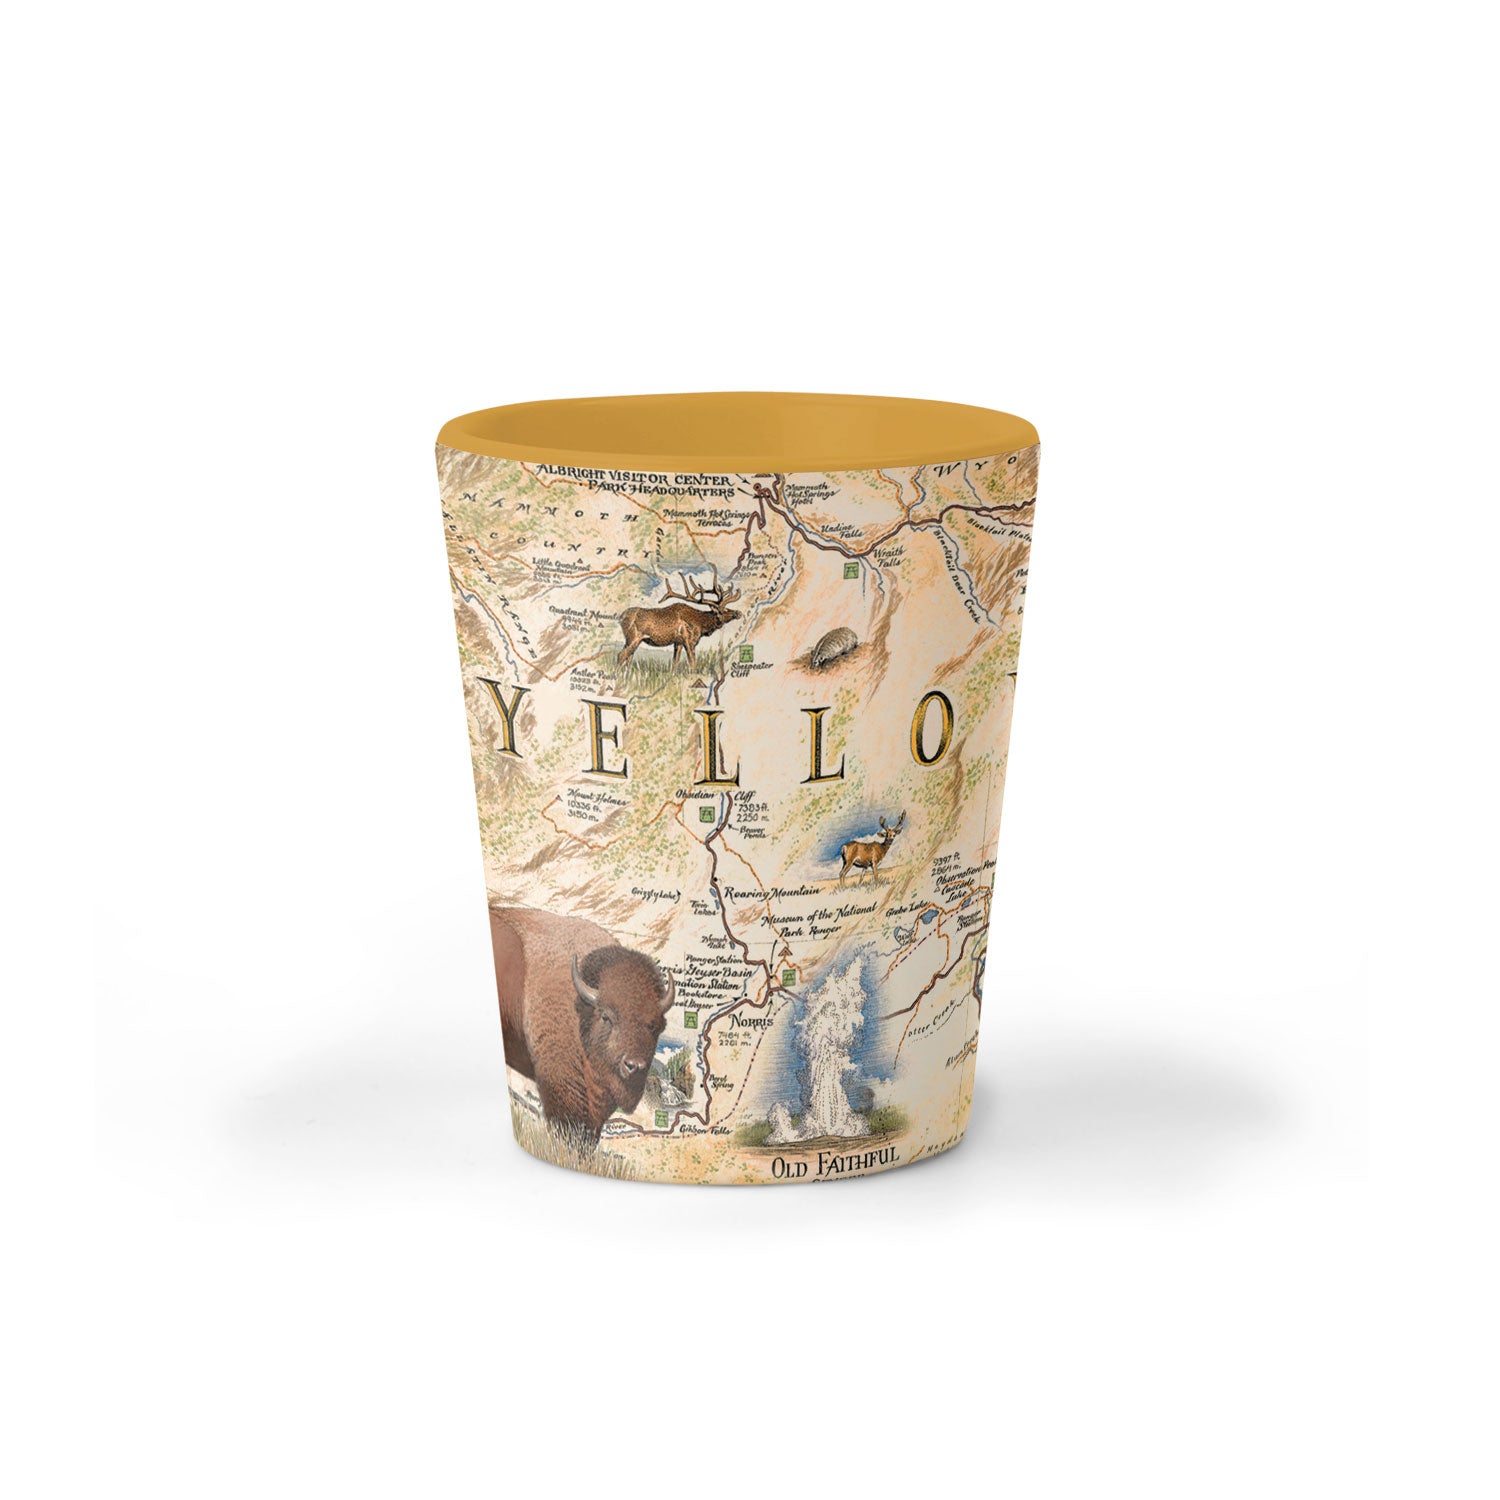 Yellowstone National Park Map Ceramic shot glass by Xplorer Maps. The map features illustrations of places such as Yellowstone Lake, Old Faithful, and Roosevelt Tower. Flora and fauna include mountain lions, world, grizzly bears, fireweed, and lupine.